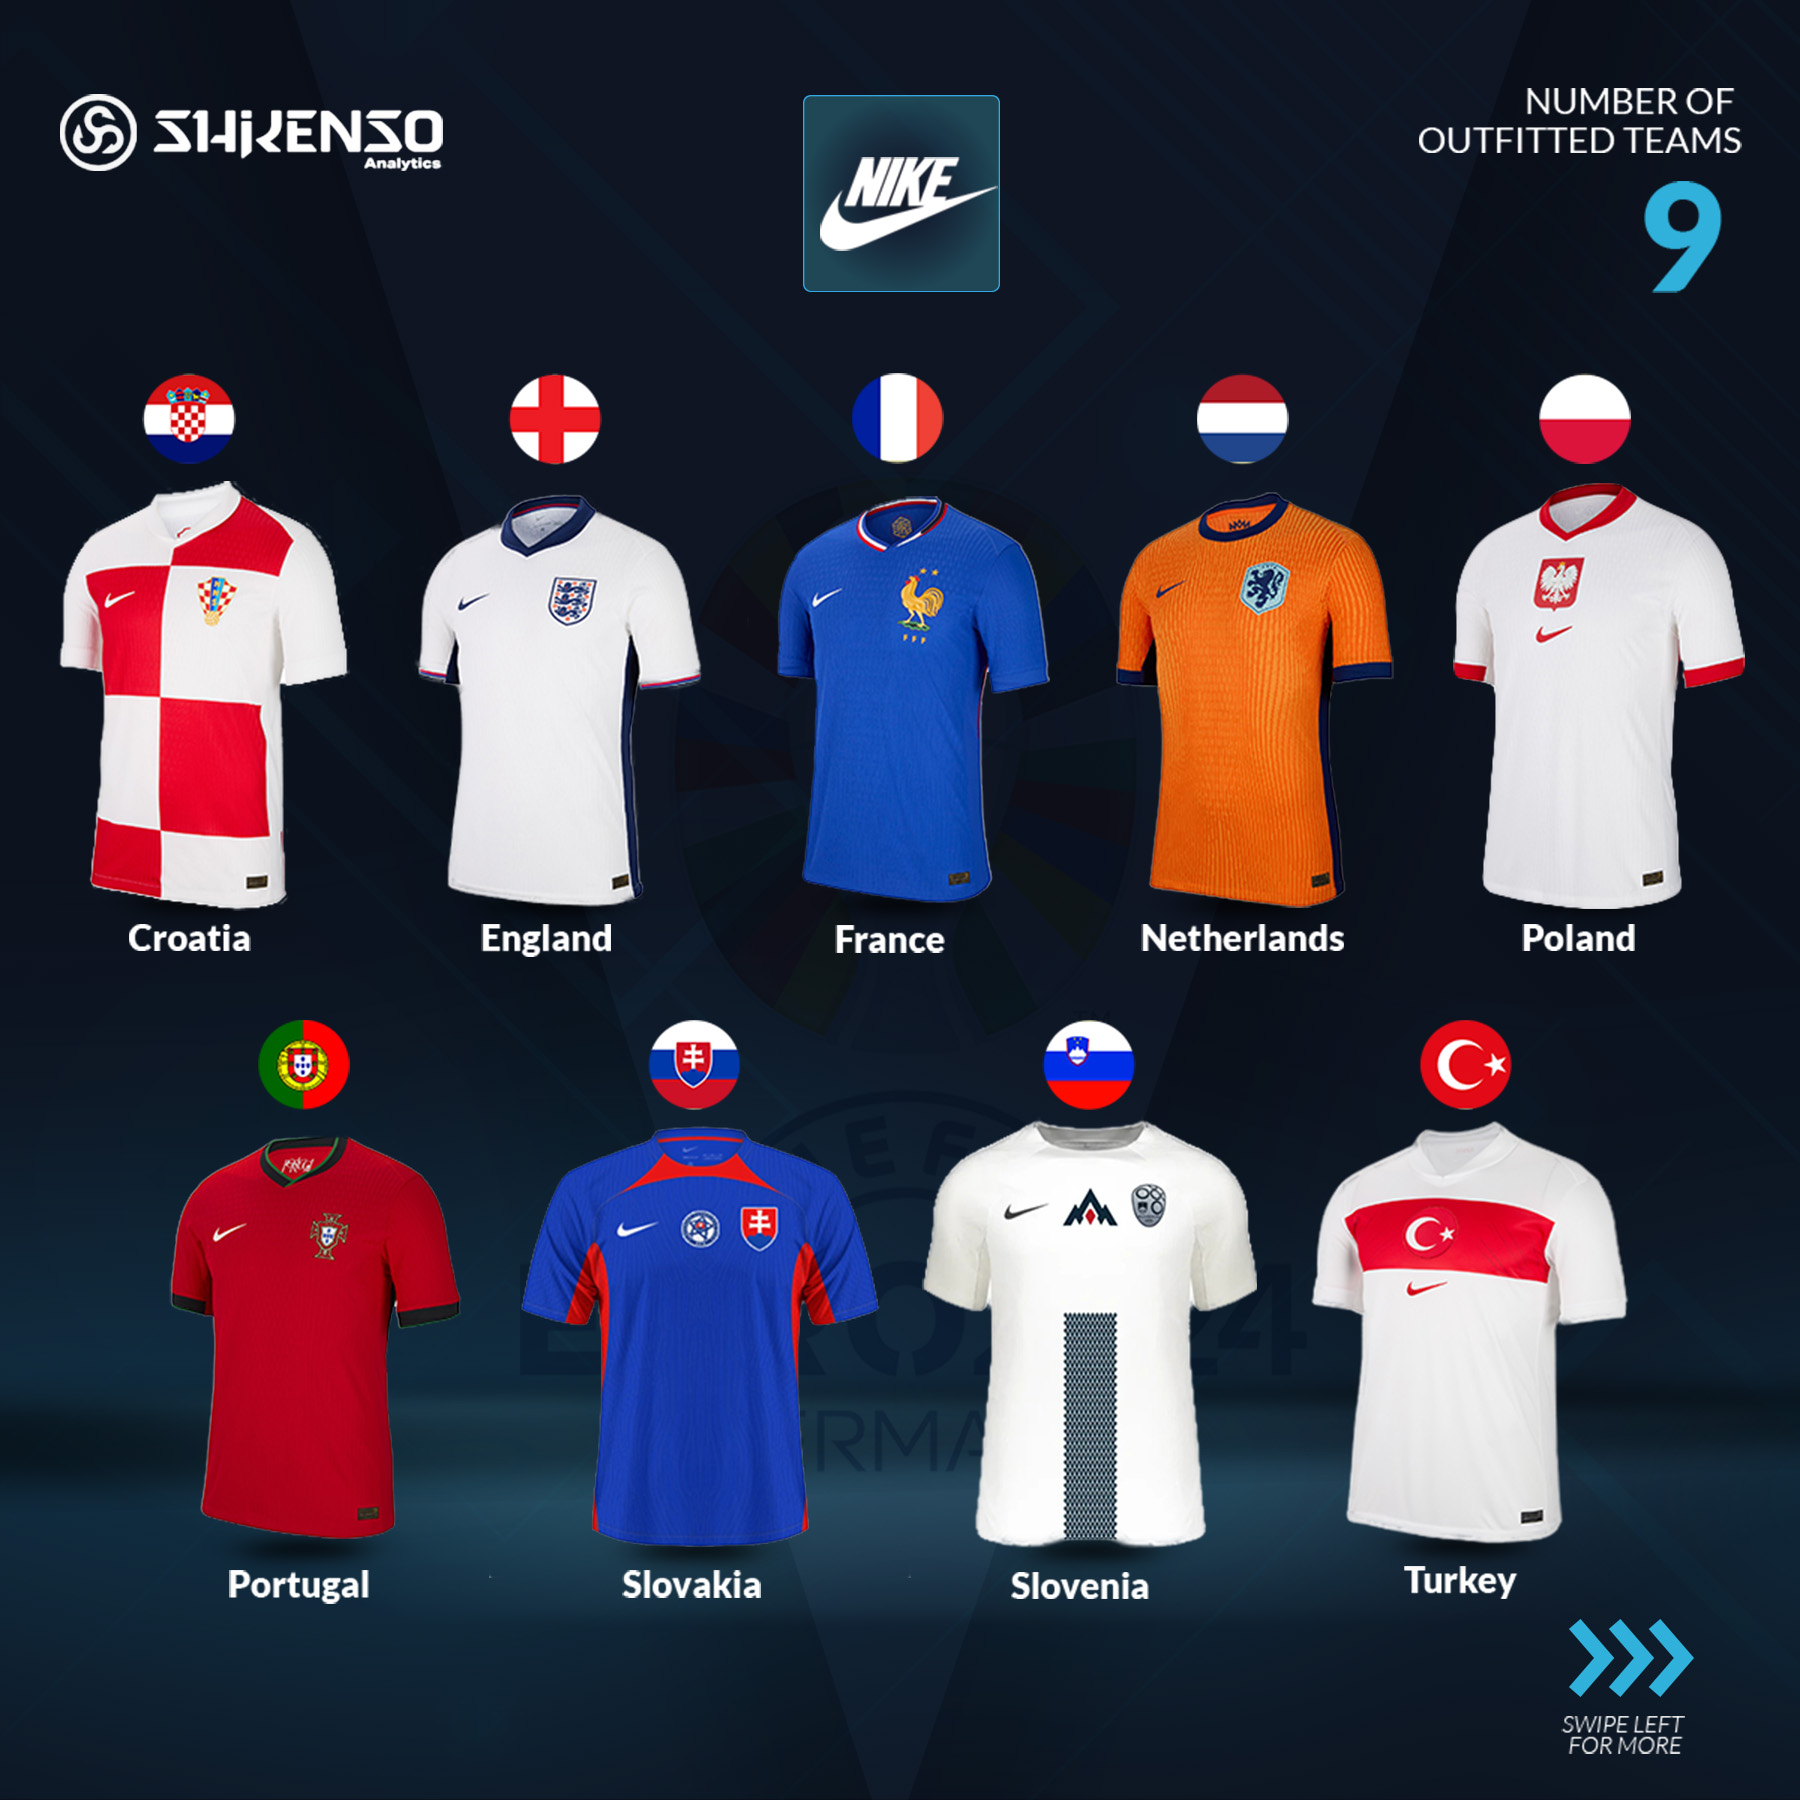 Detailed graphic of Nike's outfitting sponsorships, showing the national teams wearing Nike kits at EURO 2024.